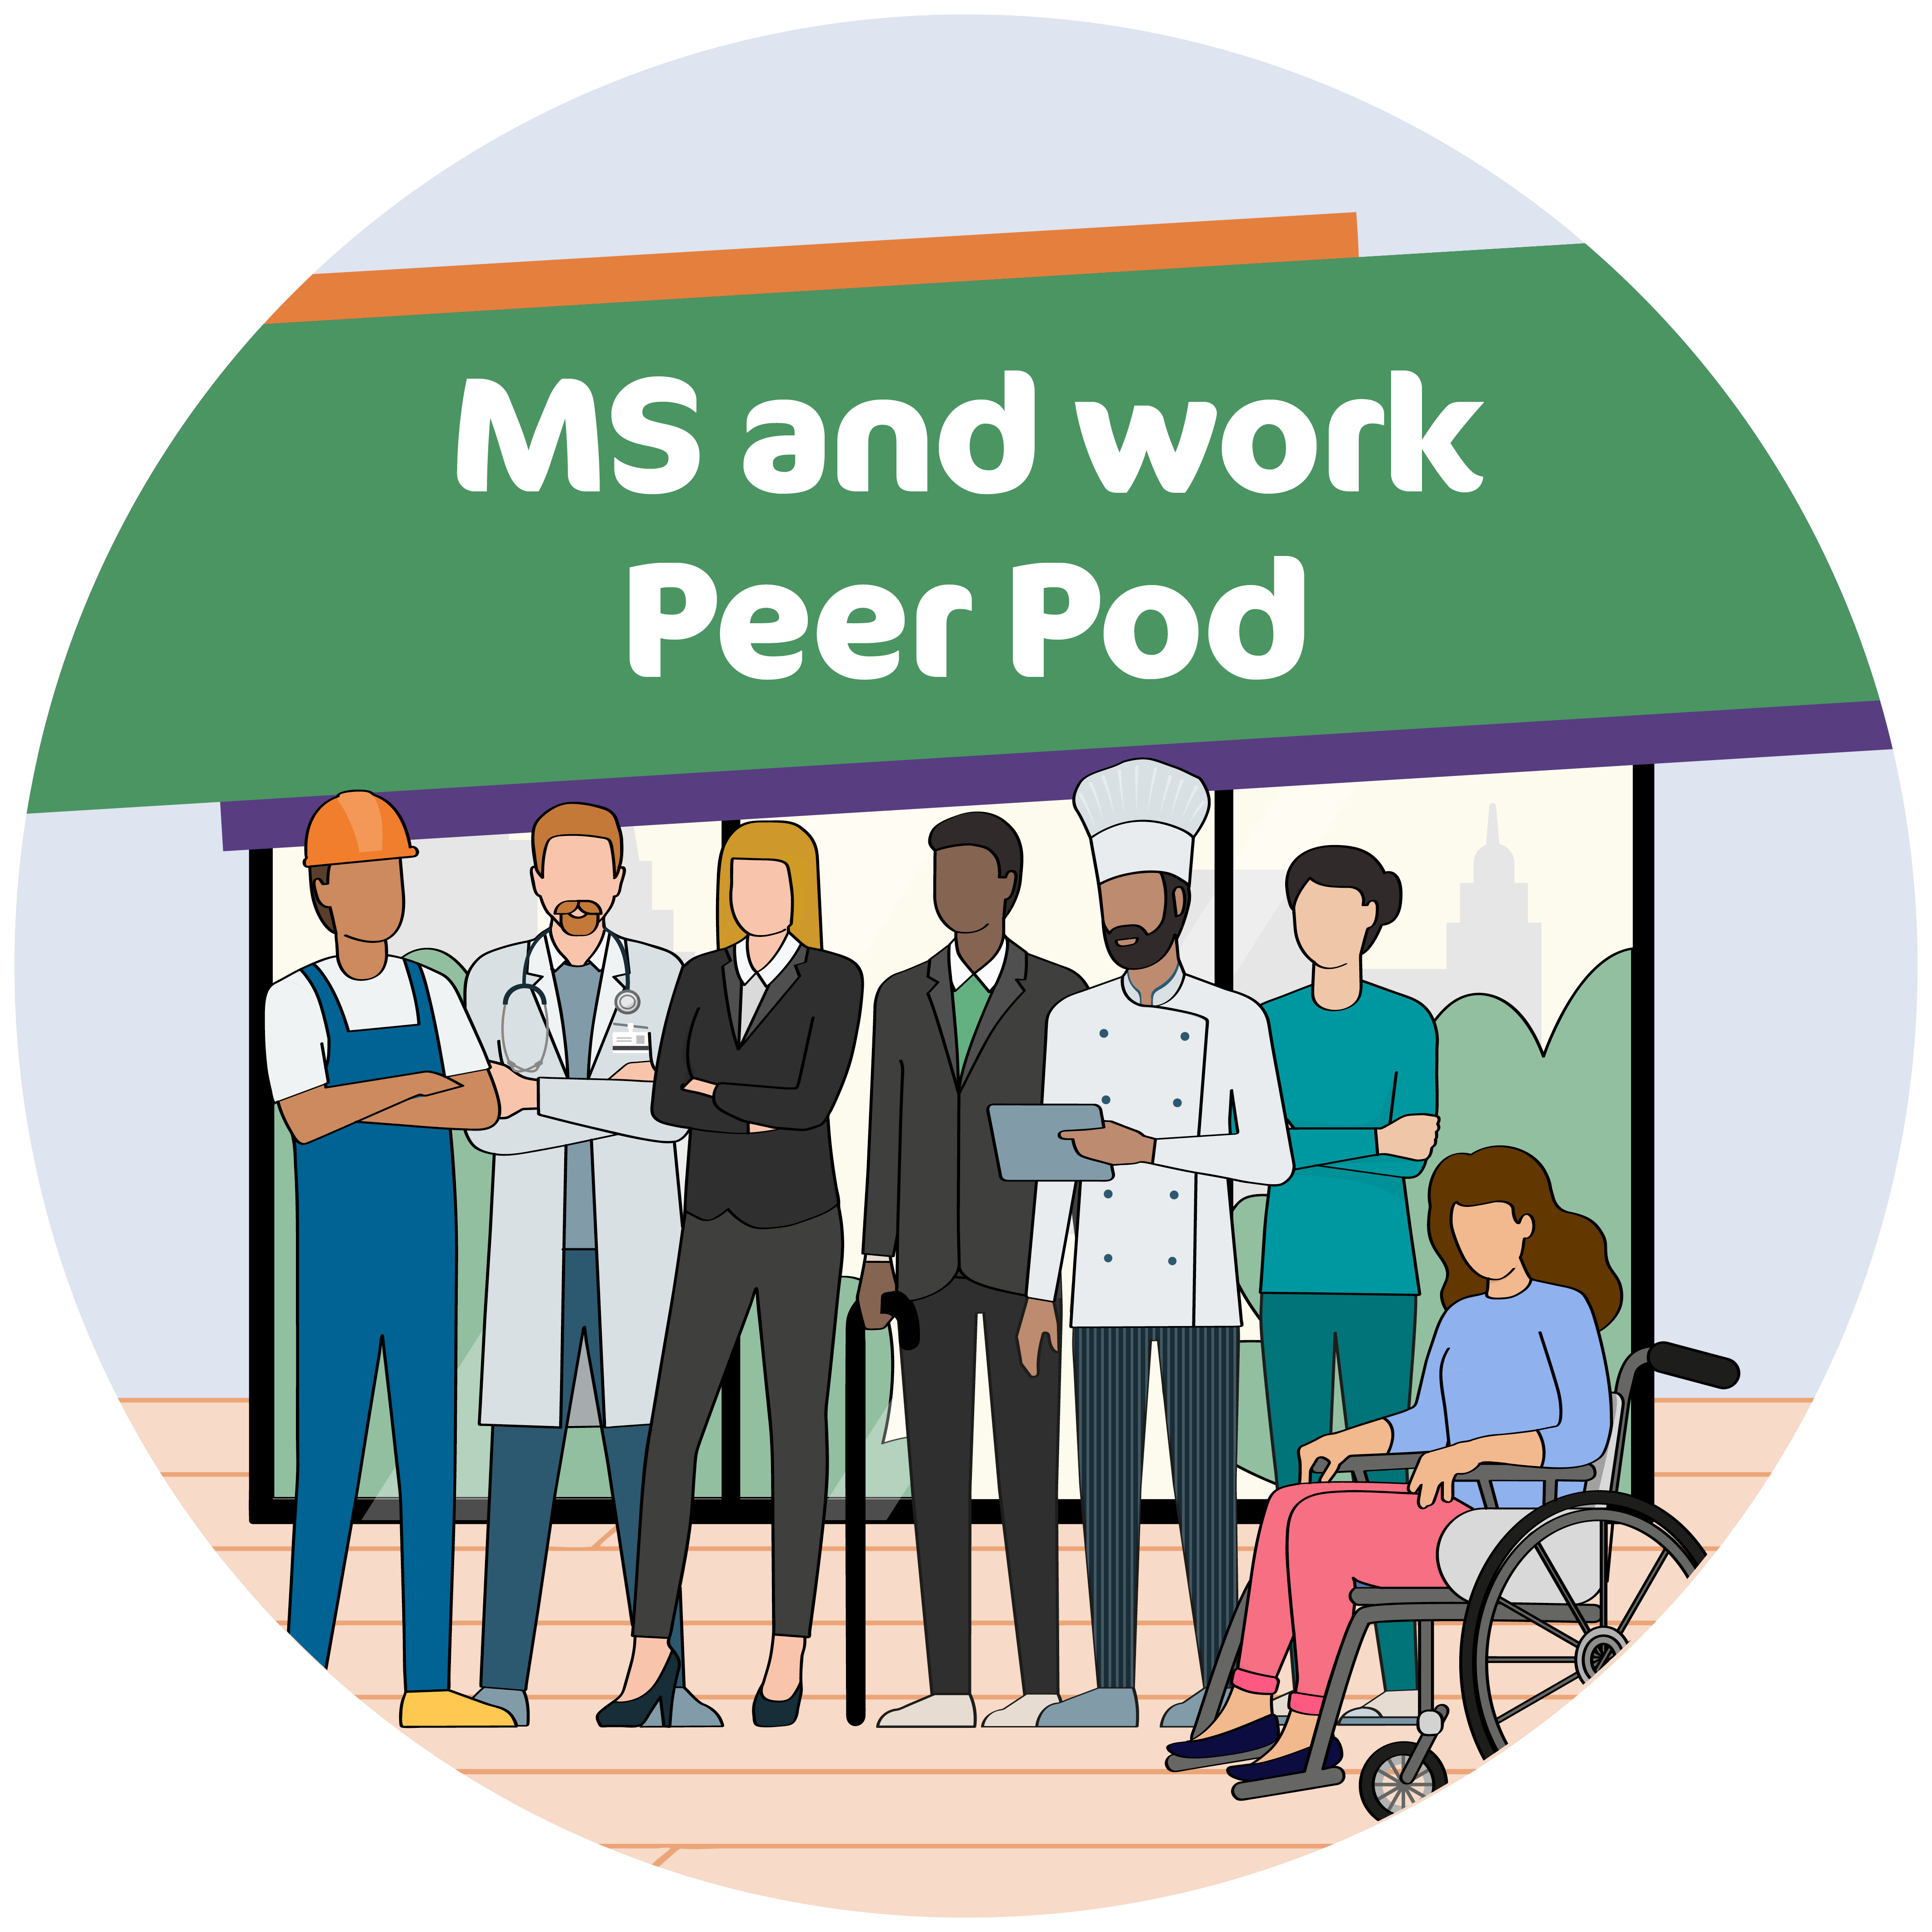 MS and work Peer pod